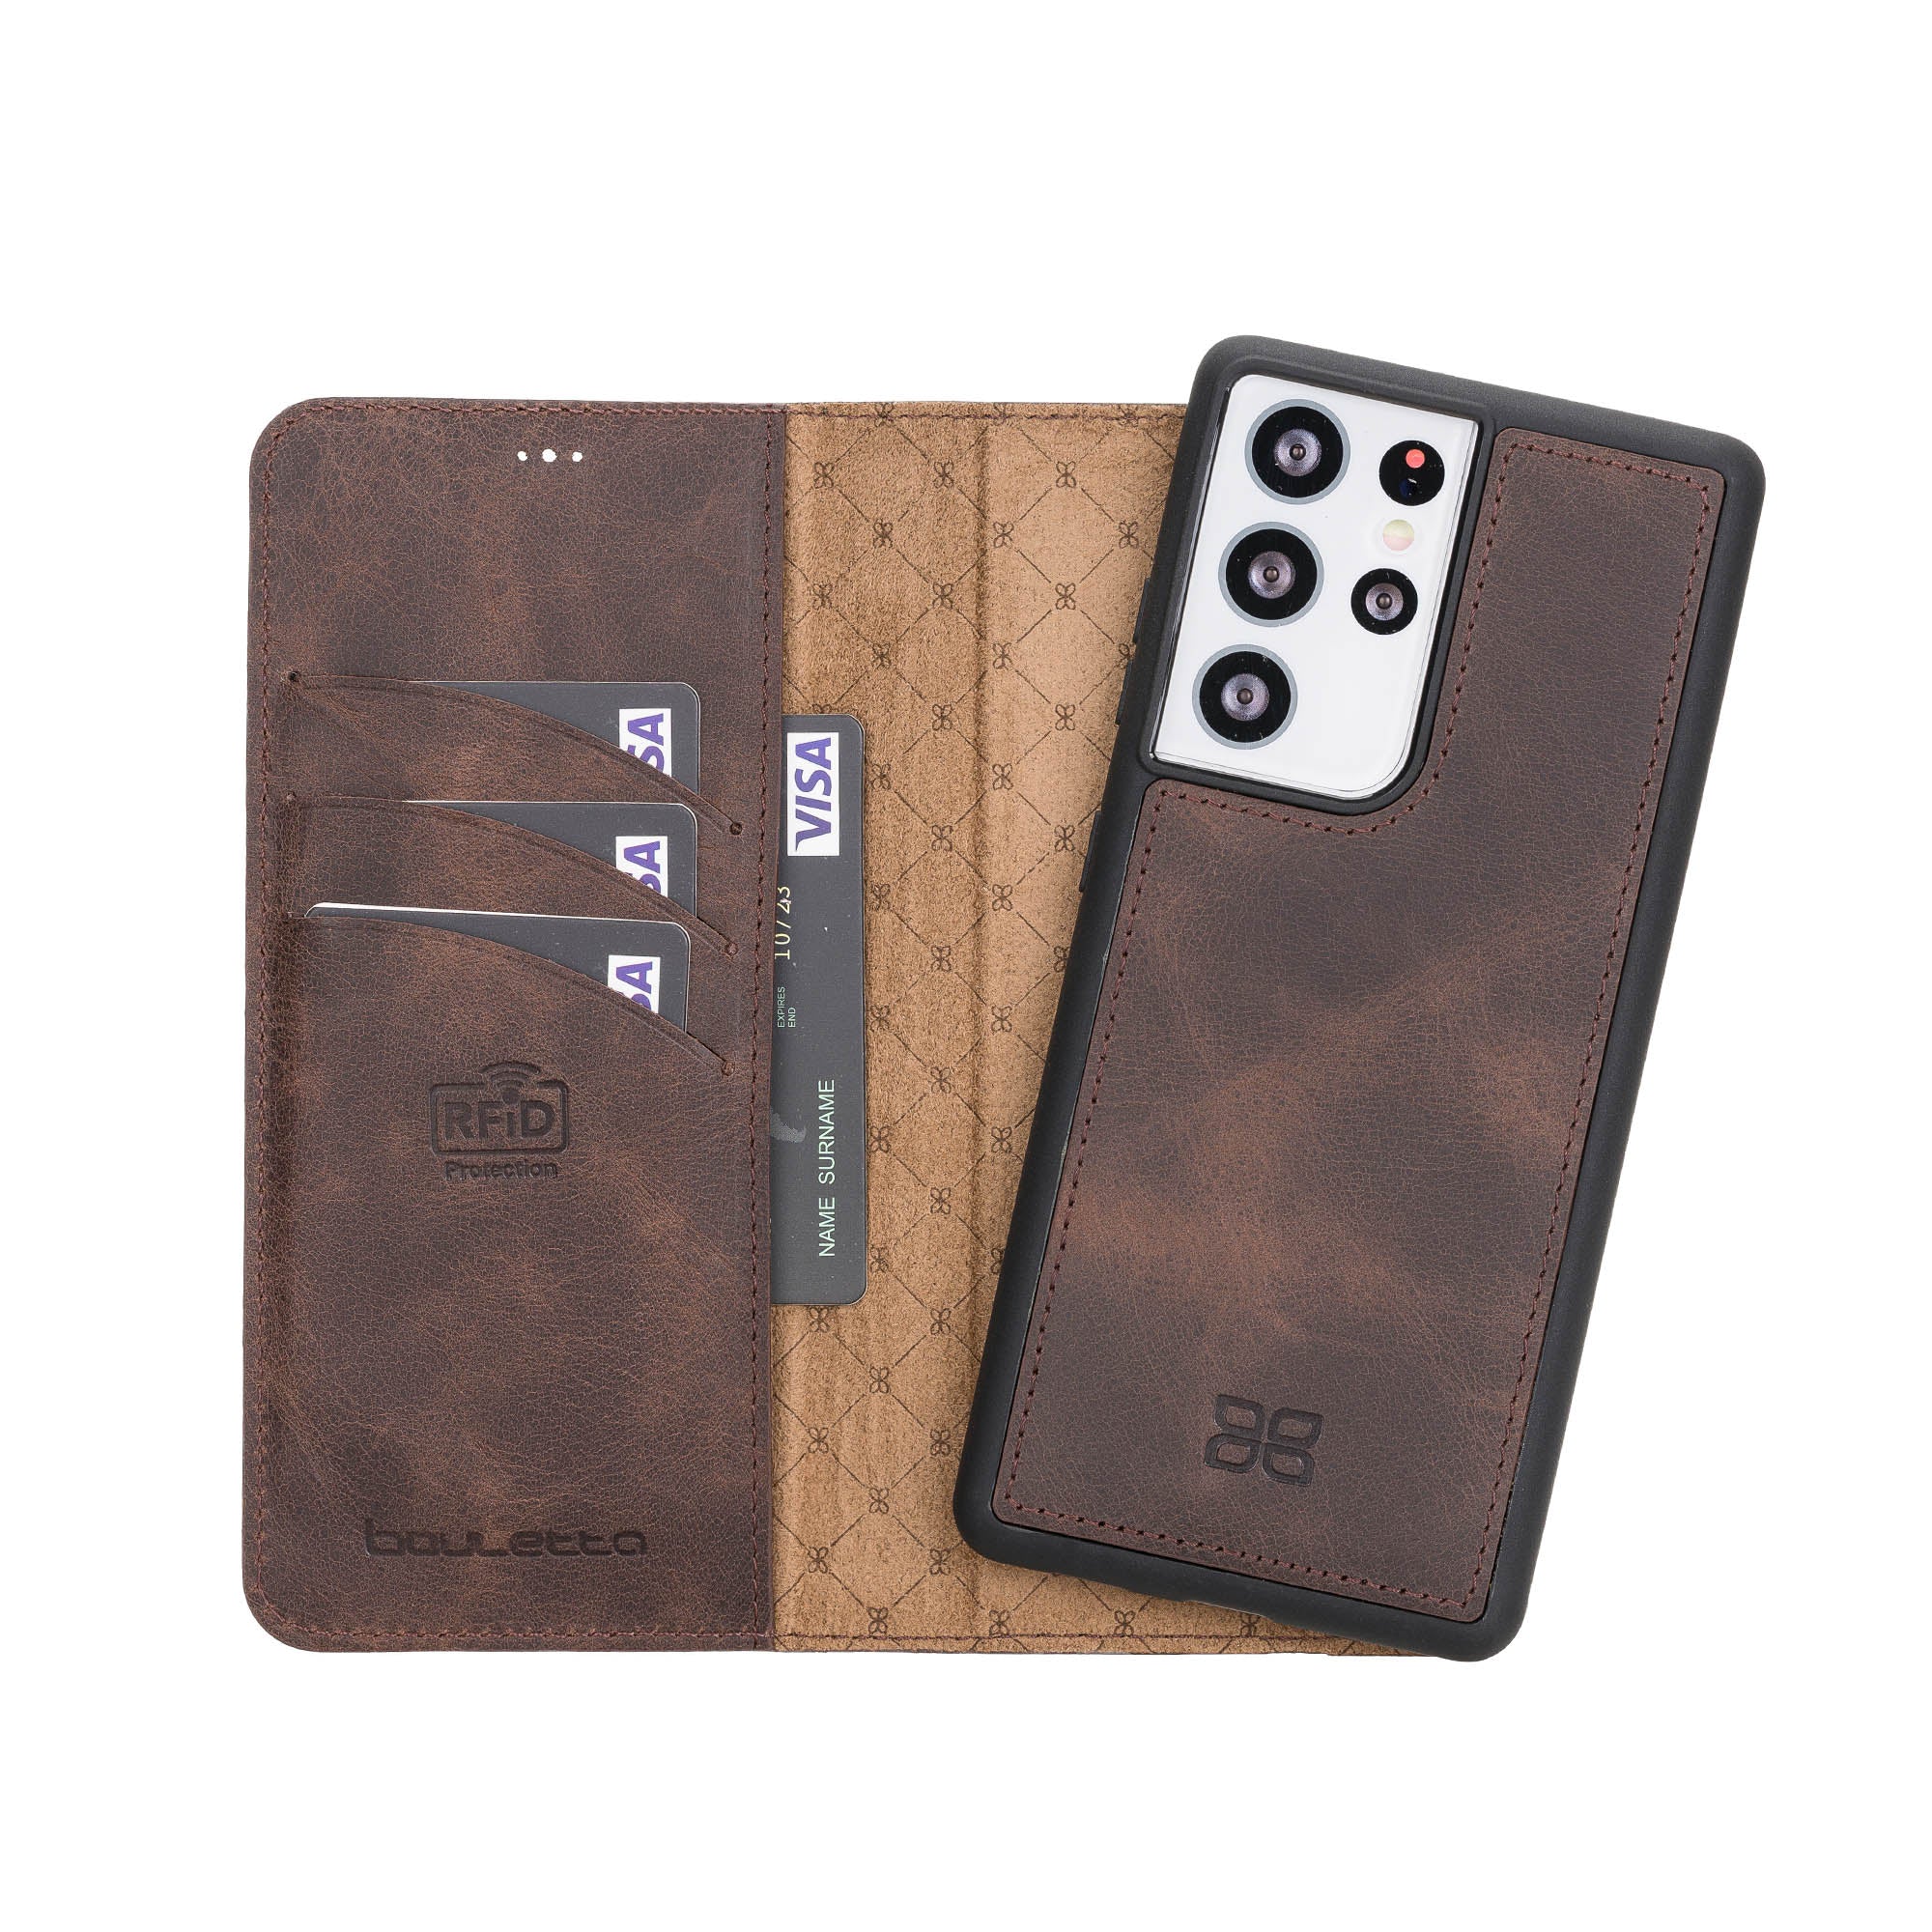 Louis Vuitton Cover Case For Samsung Galaxy S22 Ultra Plus S21 S20 S10 Note  -4